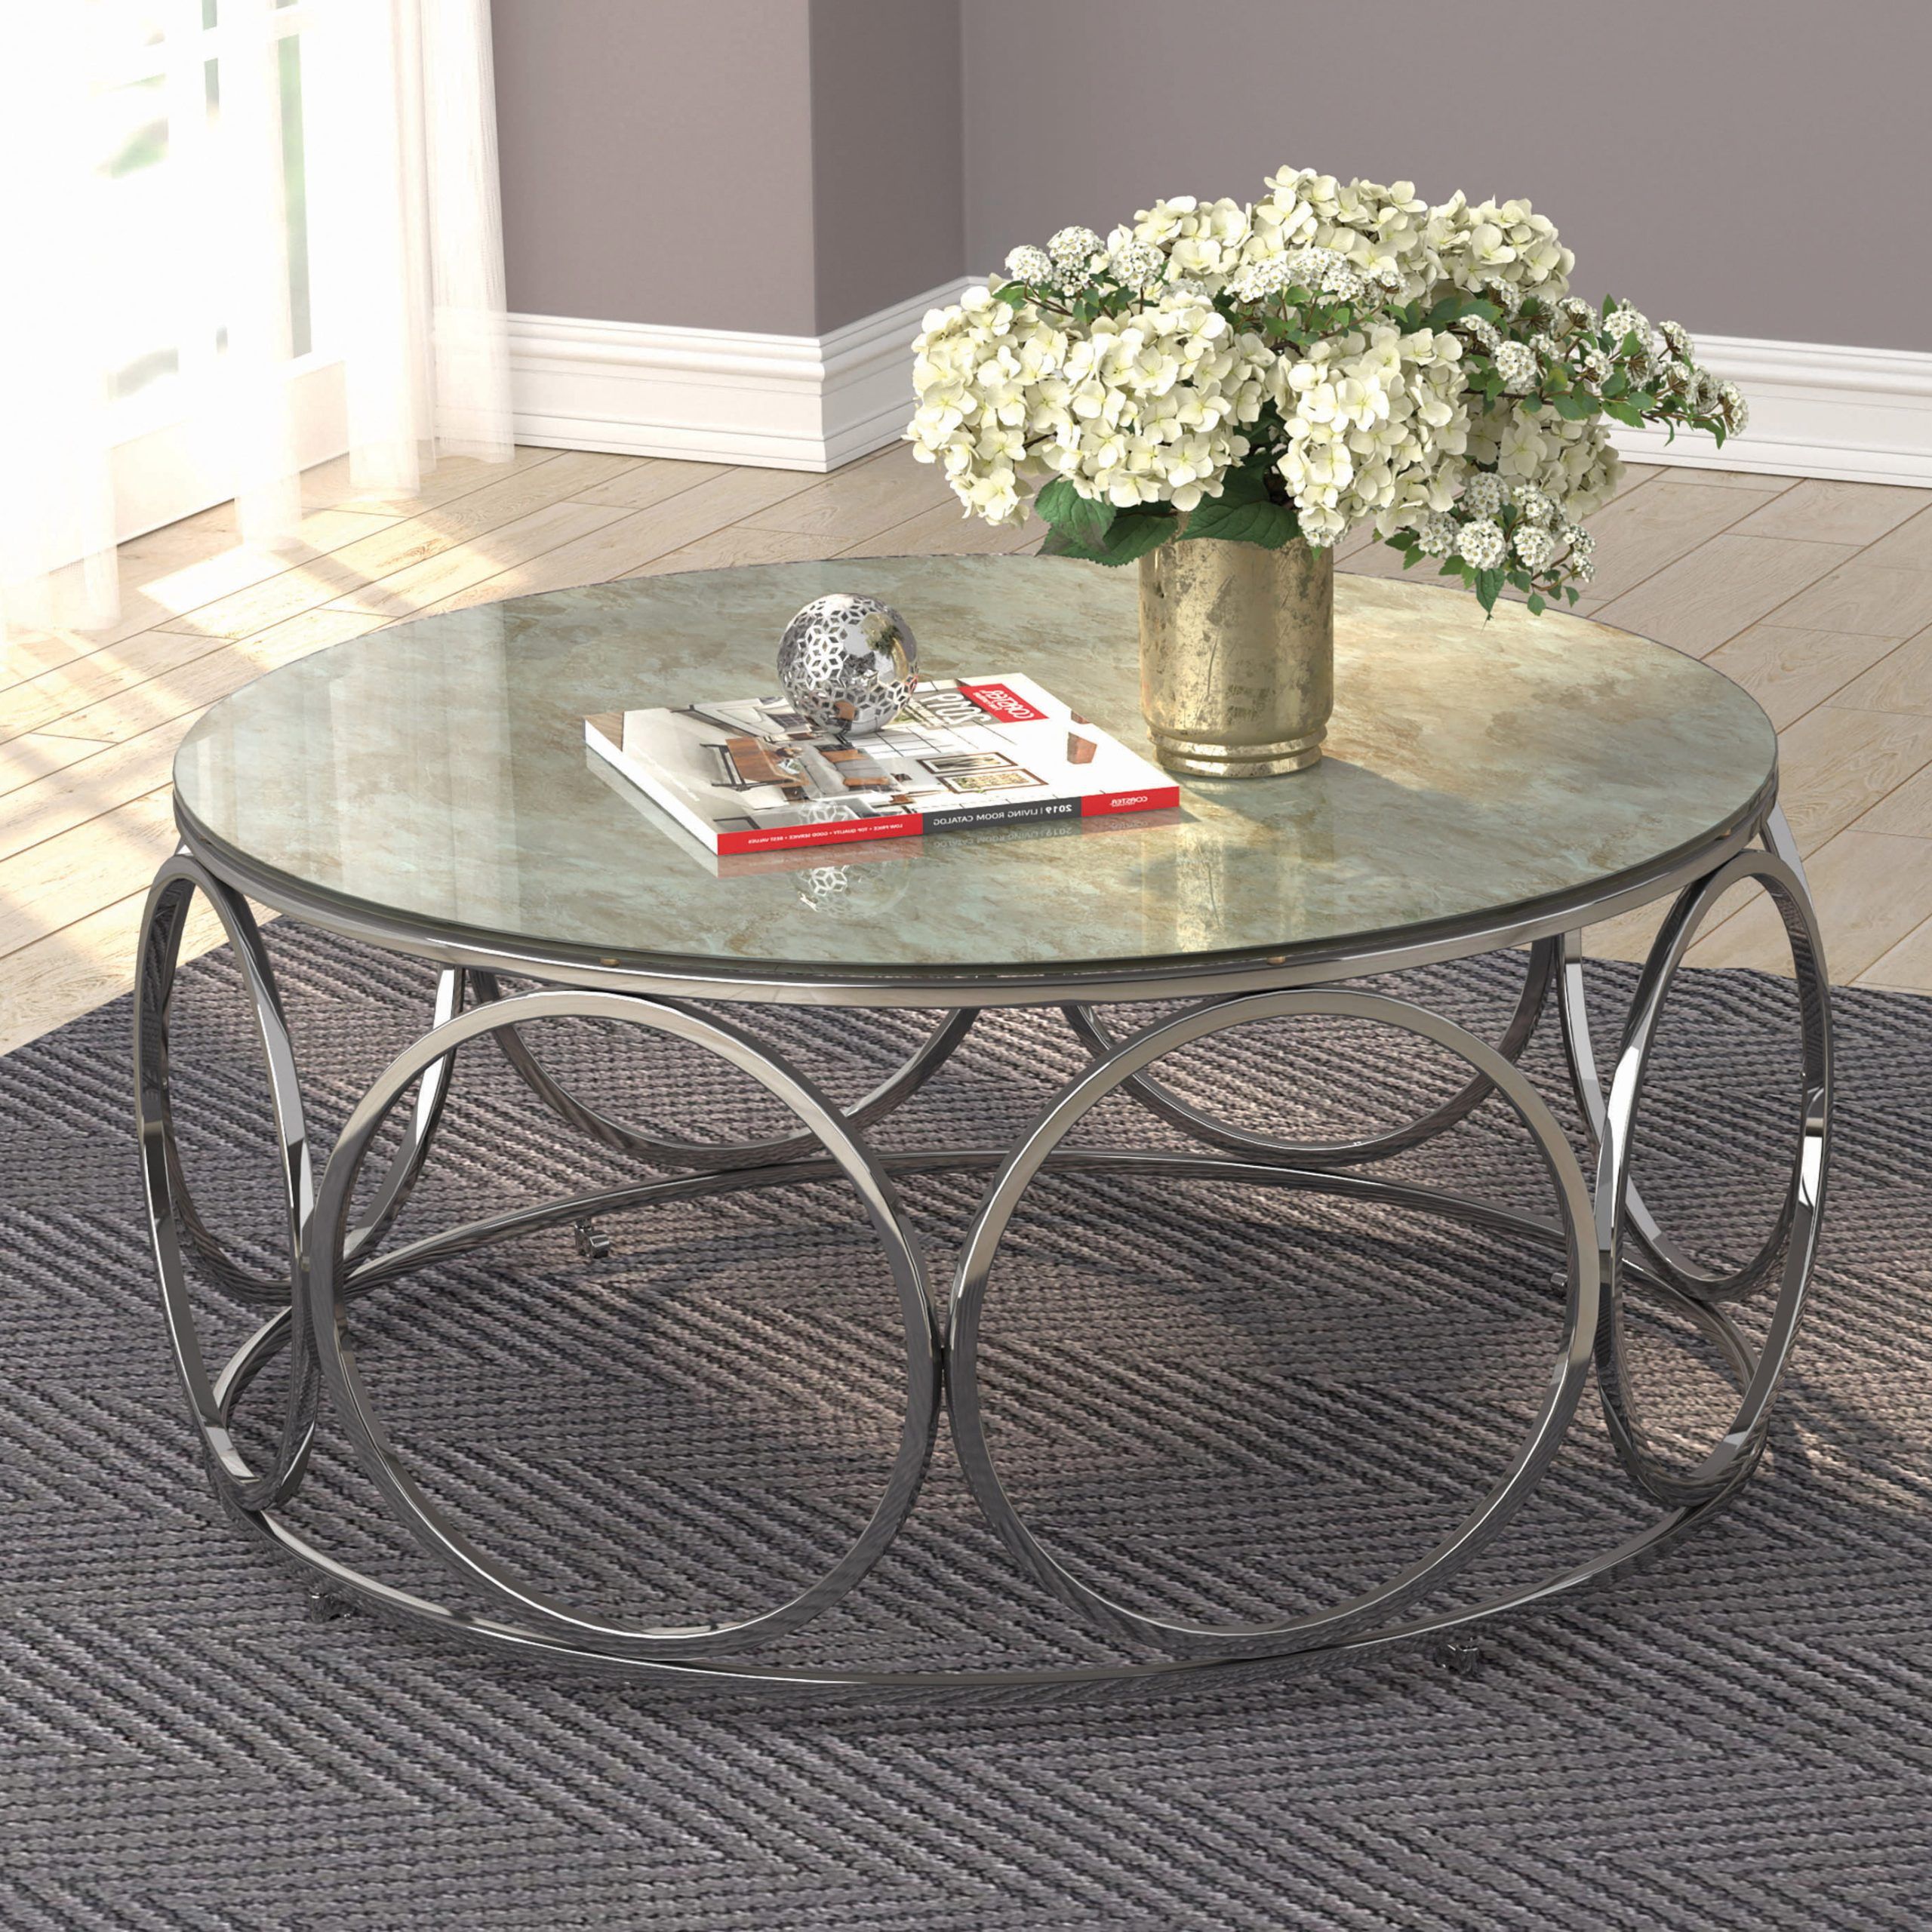 Round Coffee Table With Casters Beige Marble And Chrome – Walmart With Regard To Coffee Tables With Casters (View 6 of 20)